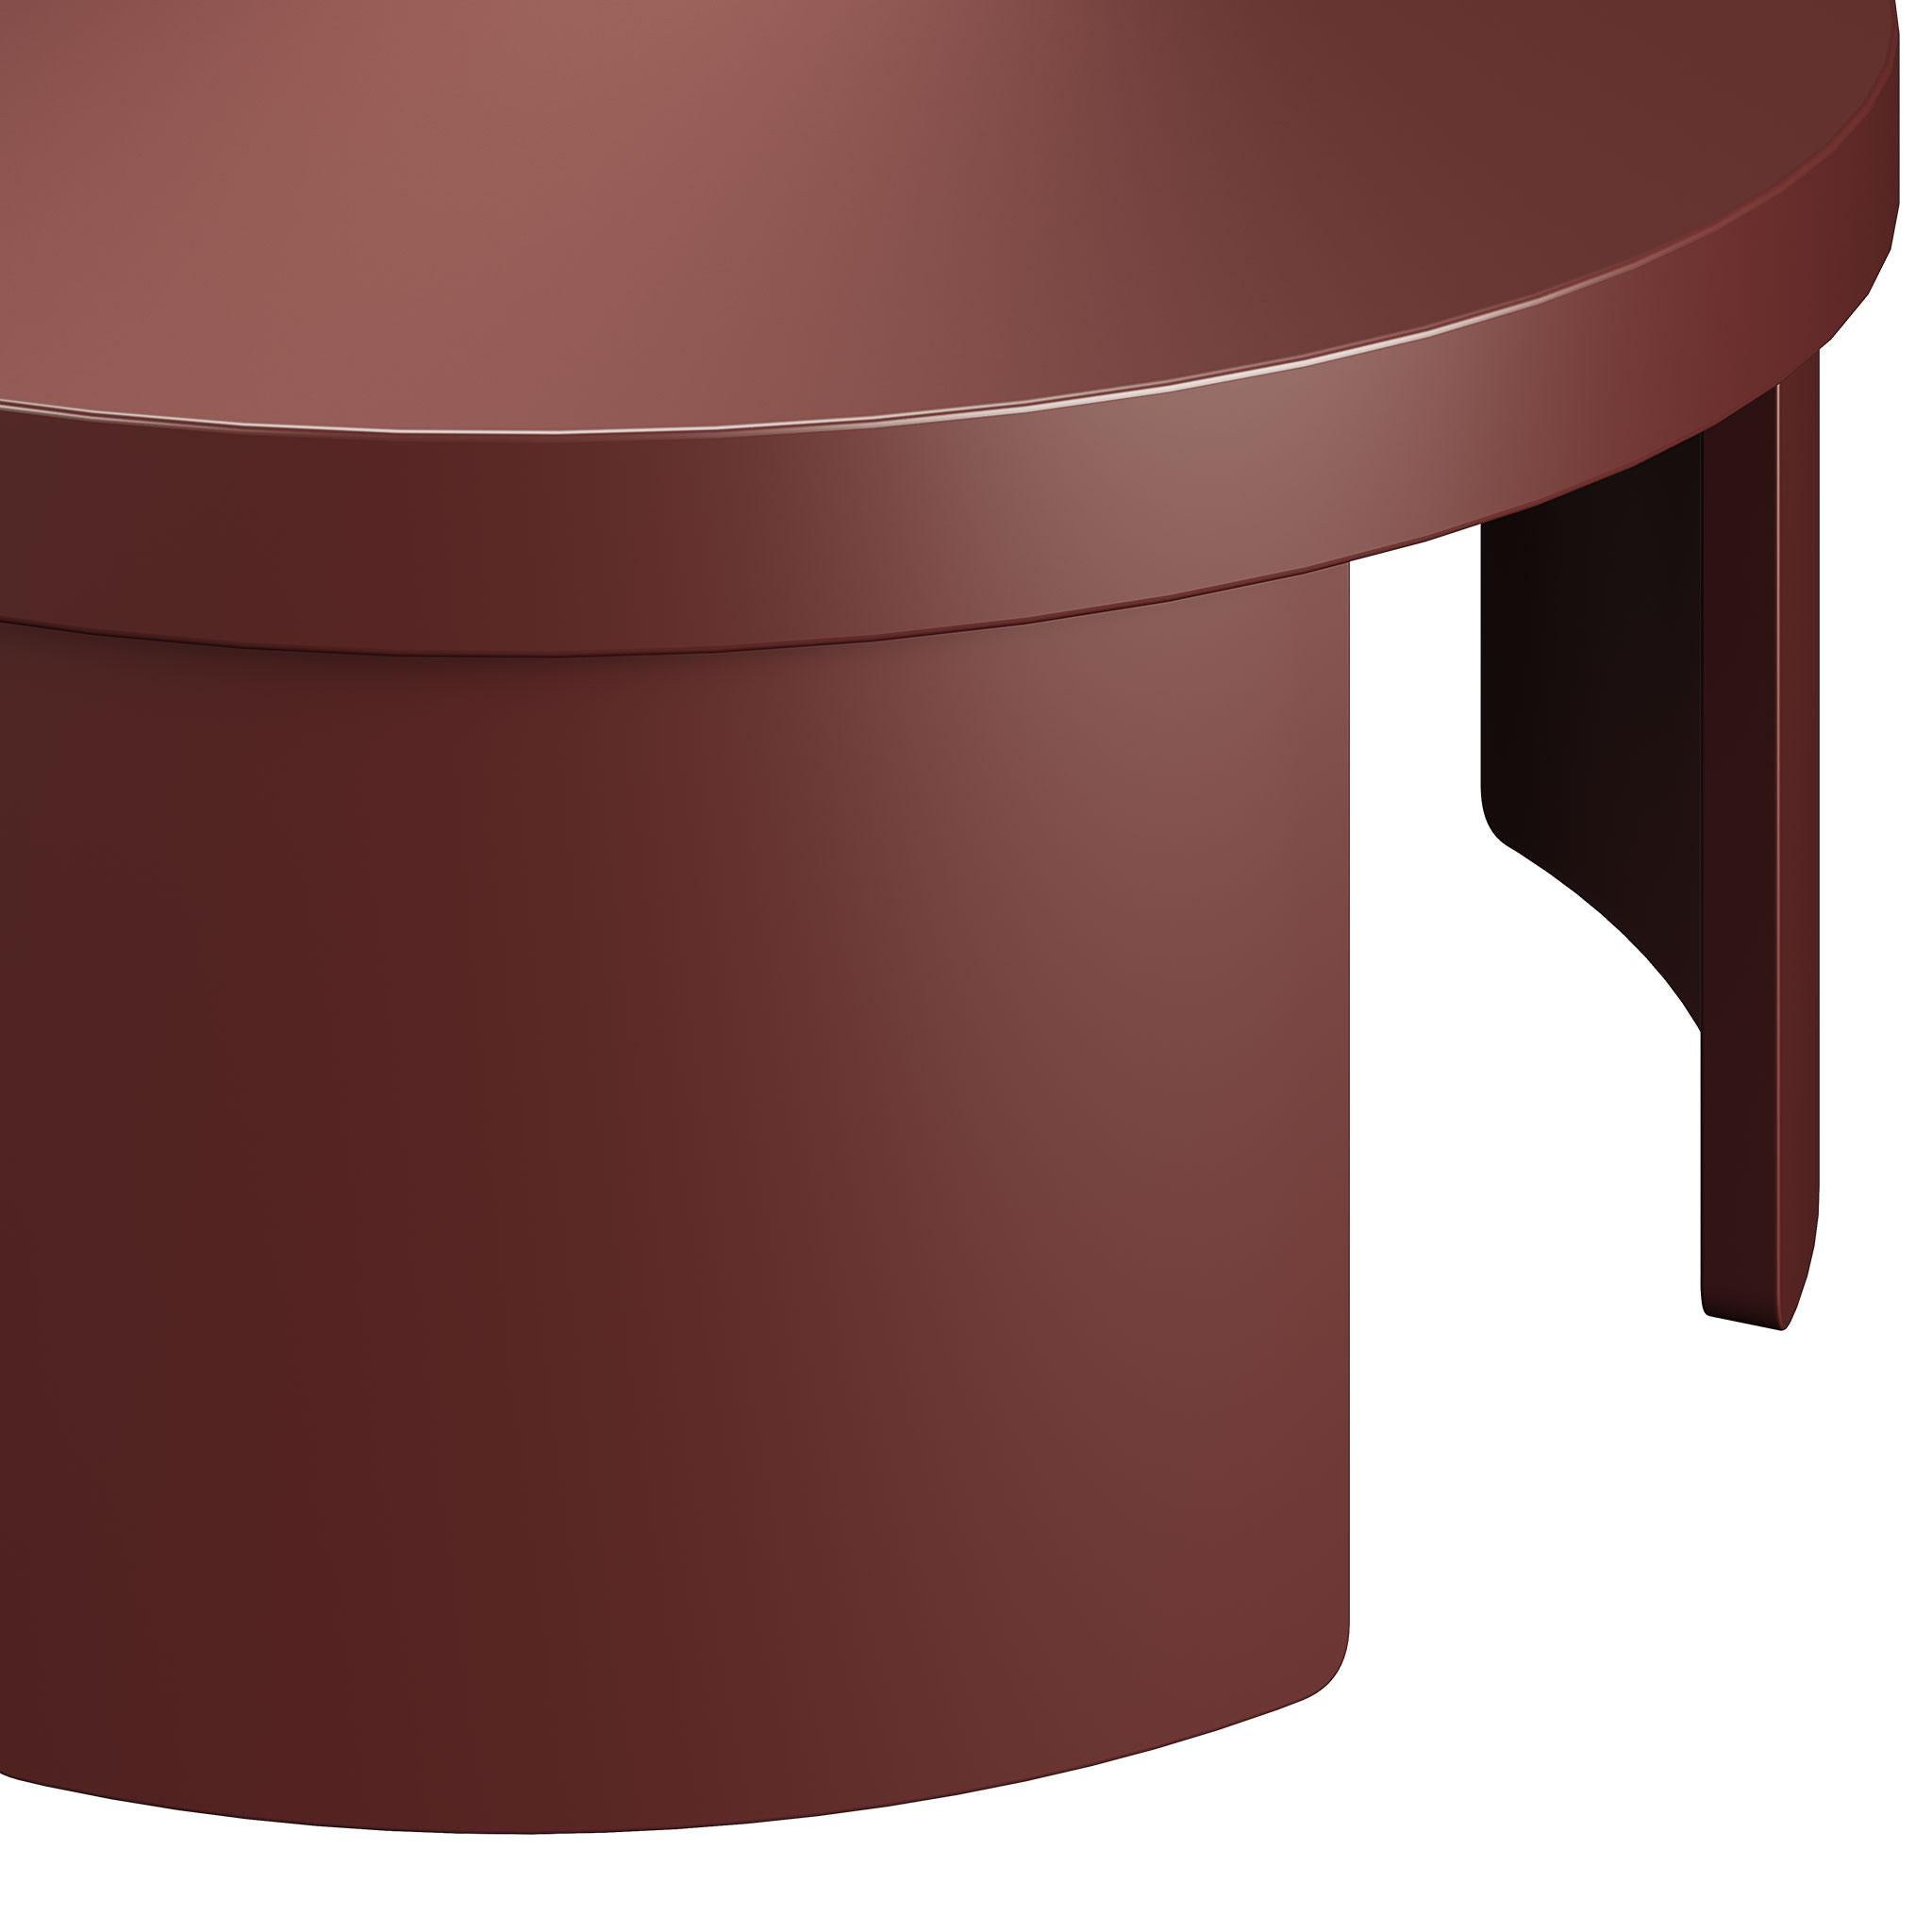 European Mid-century Modern Round Coffee Table Dark Red Brown Matte Lacquer For Sale